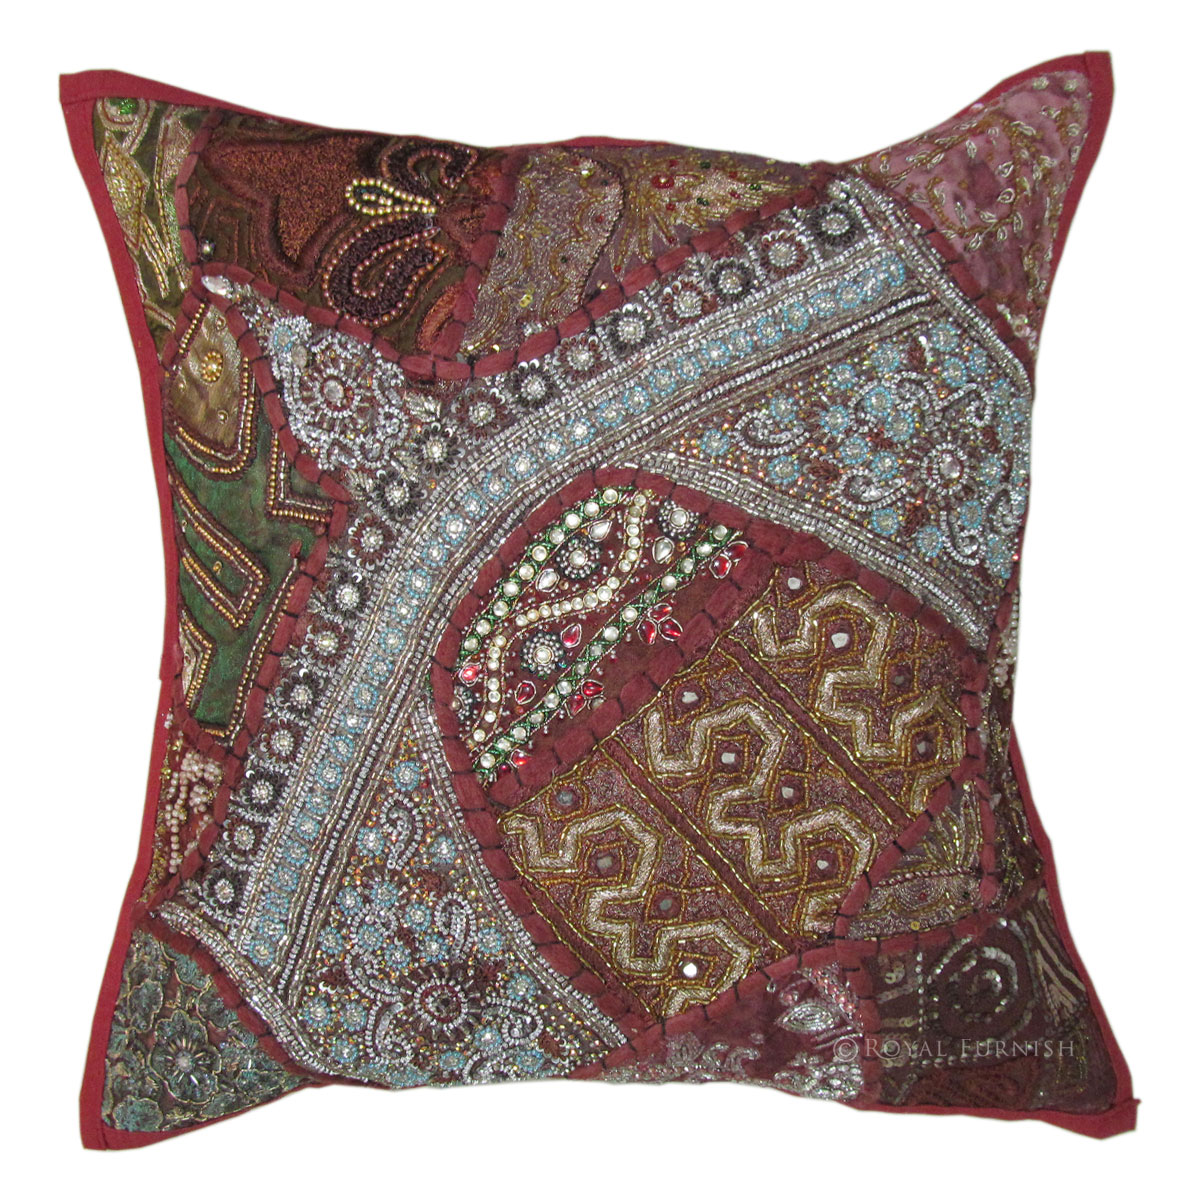 ... Heavy Bead works & Hand Embroidery Bed Pillow Cover - RoyalFurnish.com